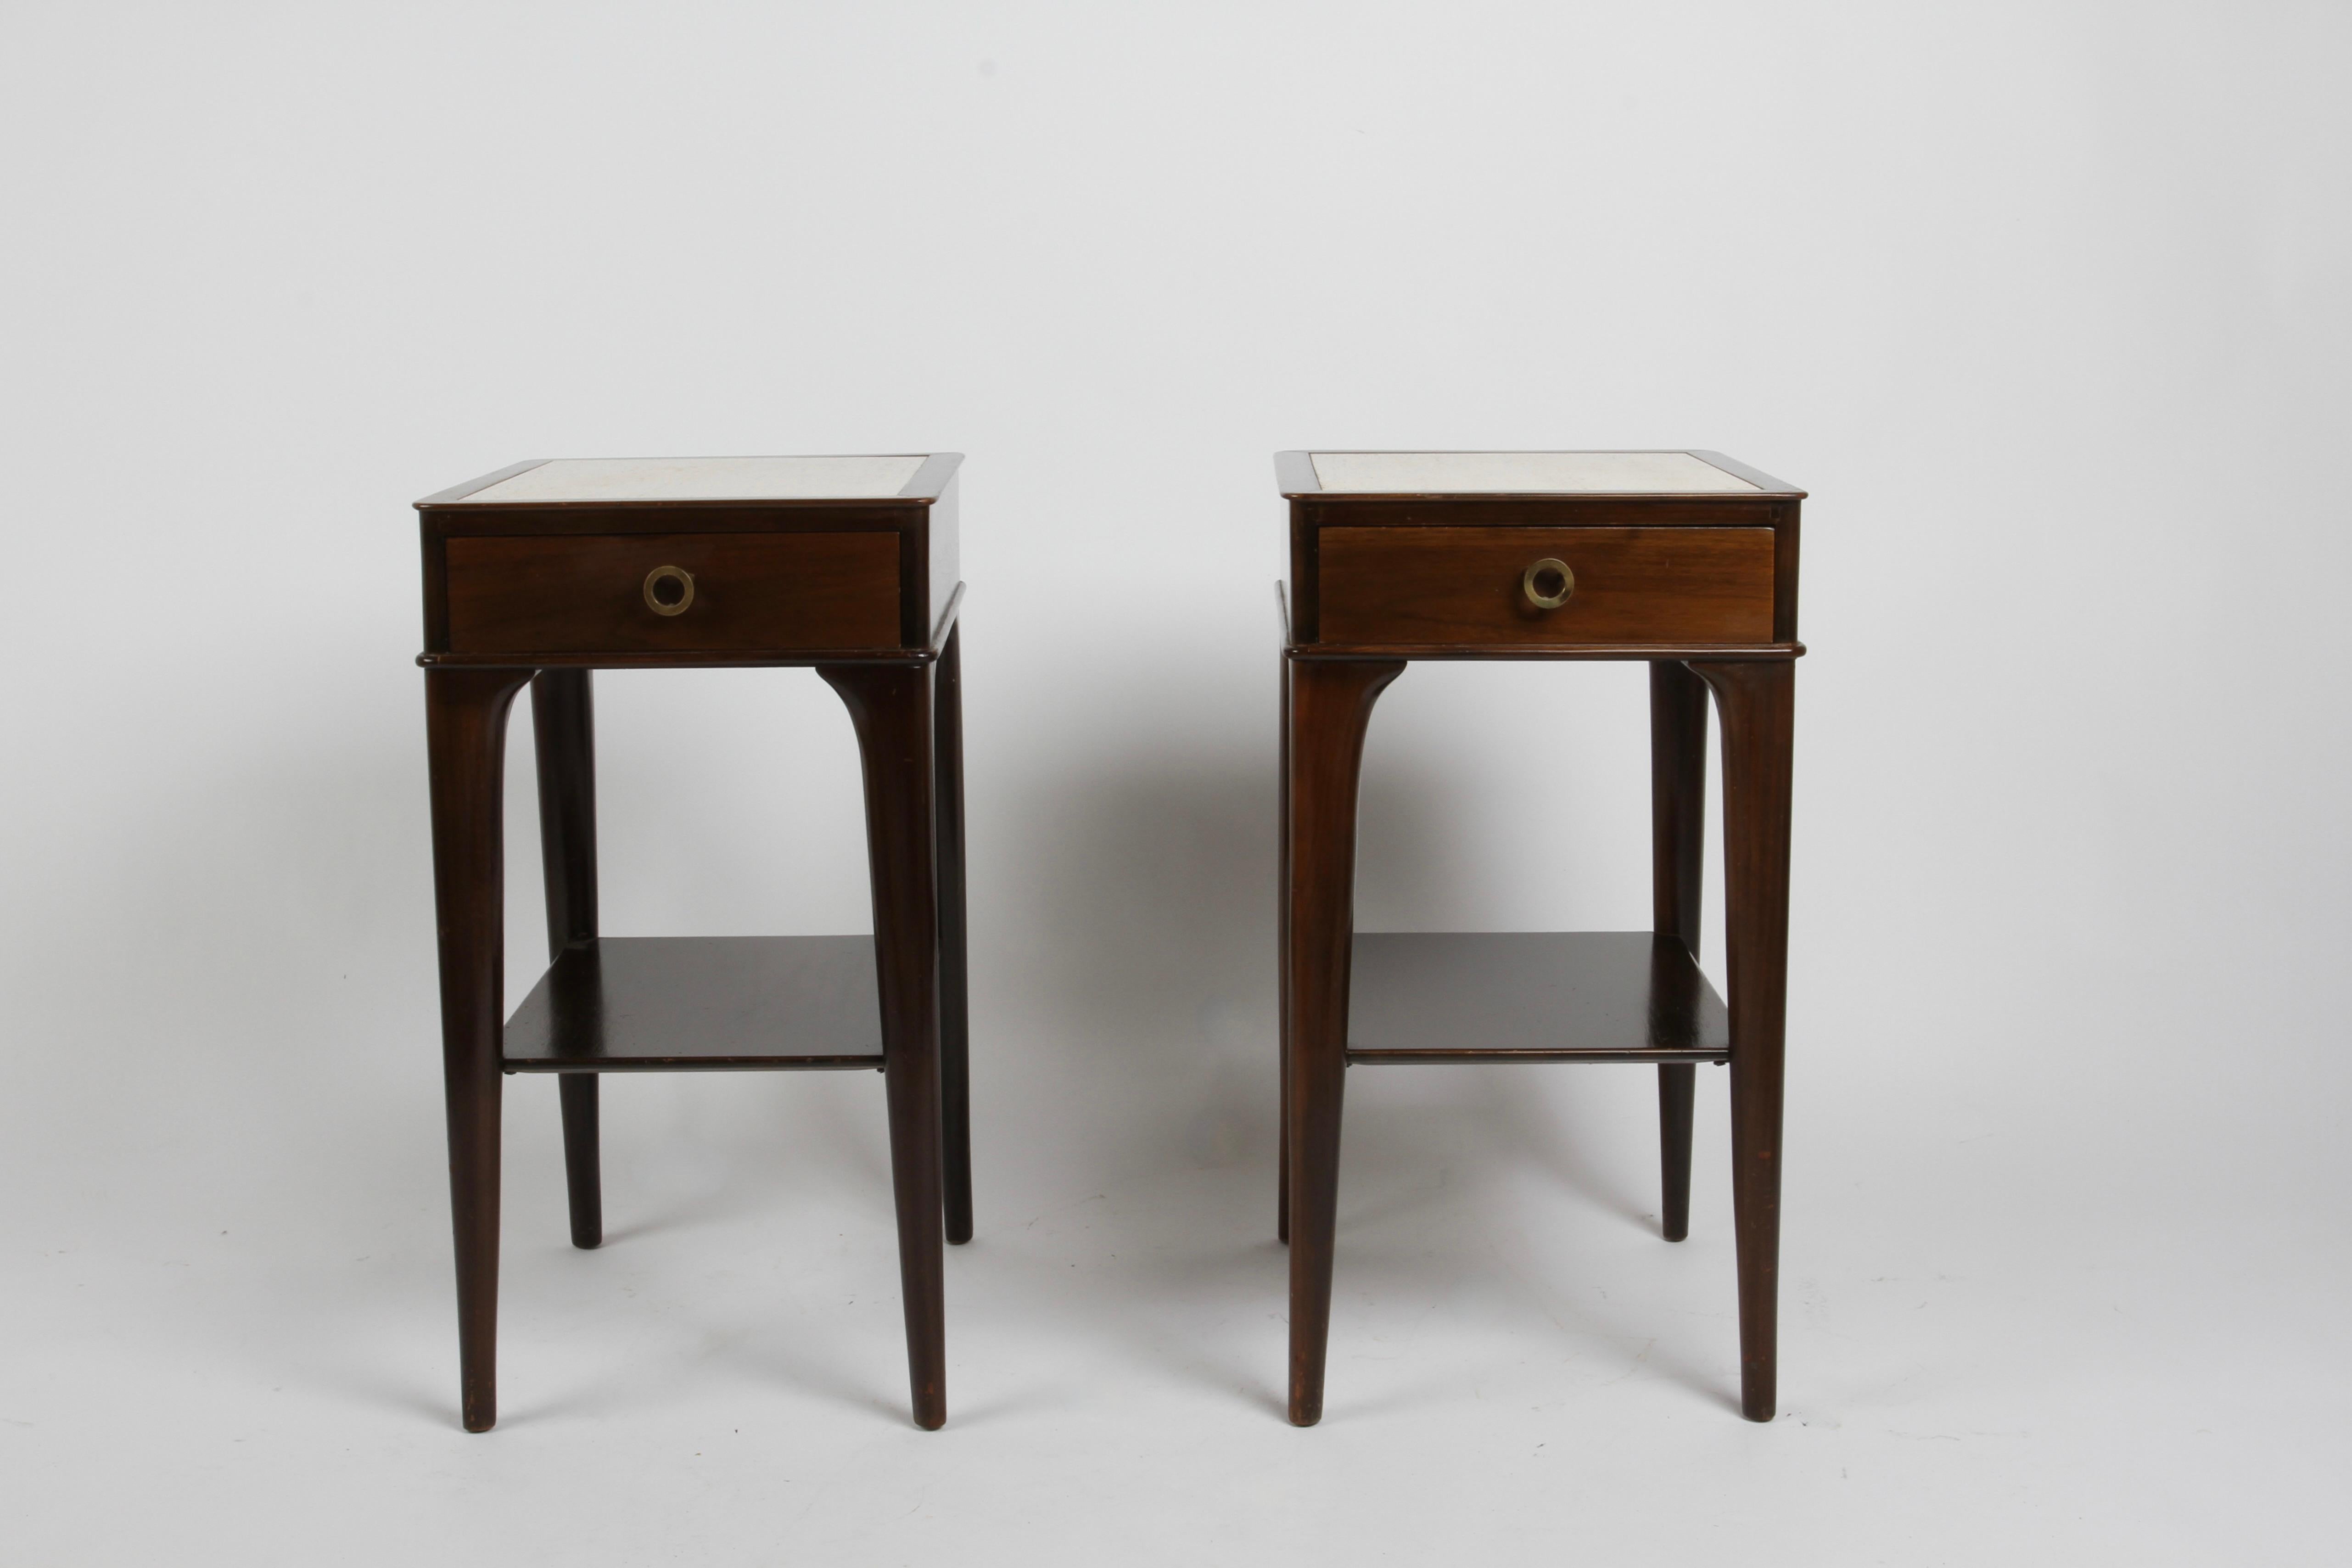 Pair of Rare Edward Wormley Dunbar for Modern Elegant Nightstands or End Tables  For Sale 4